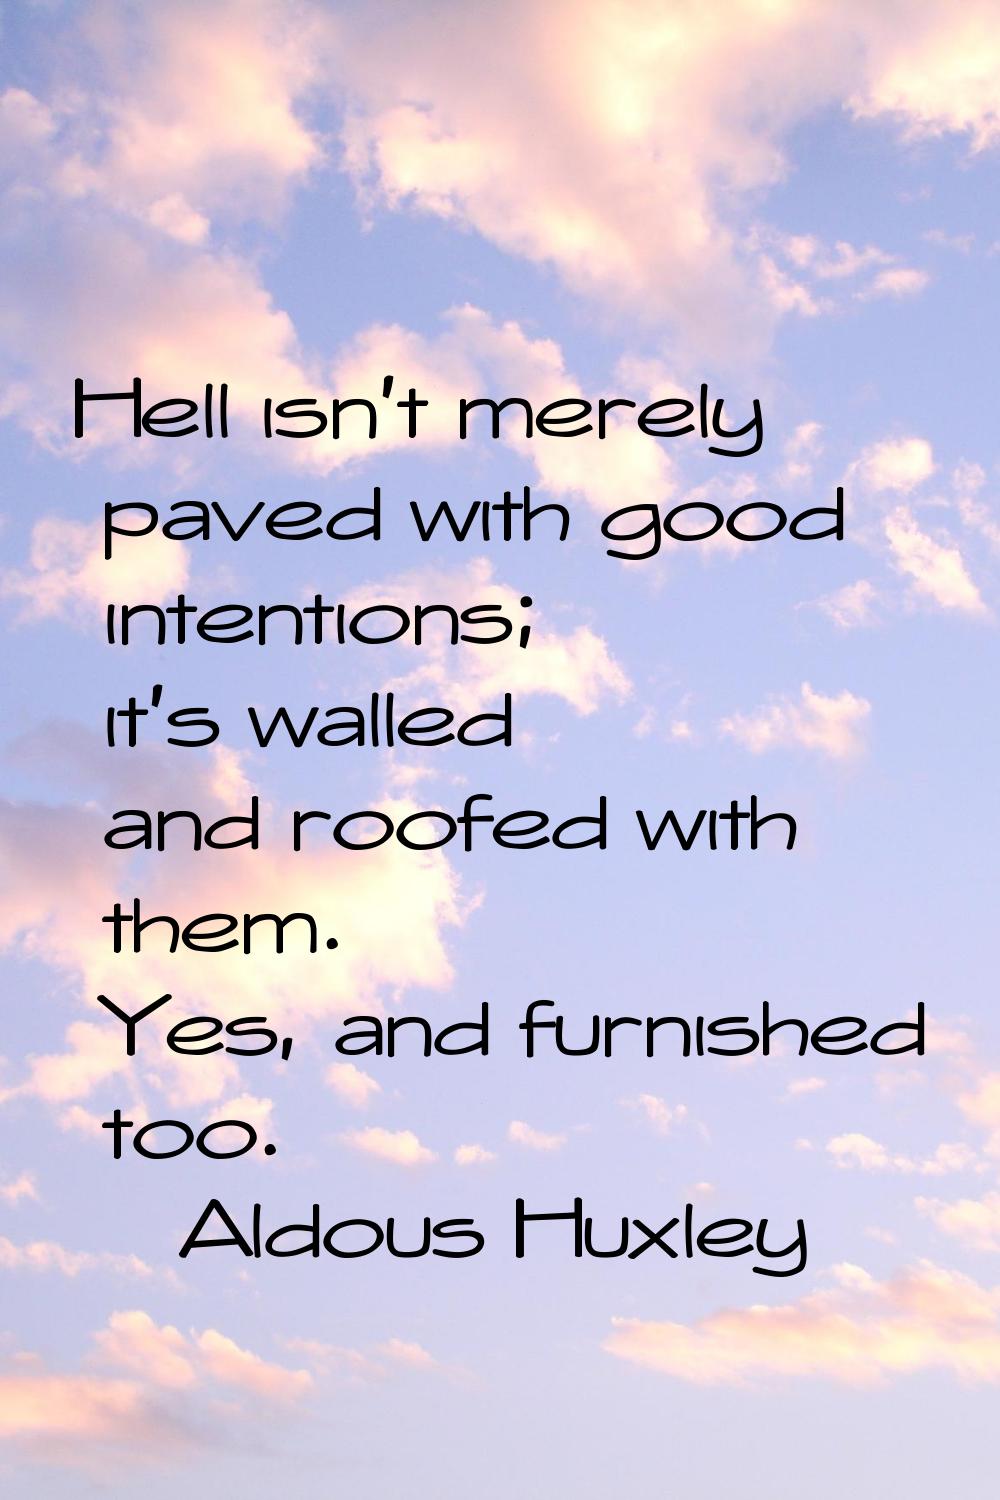 Hell isn't merely paved with good intentions; it's walled and roofed with them. Yes, and furnished 